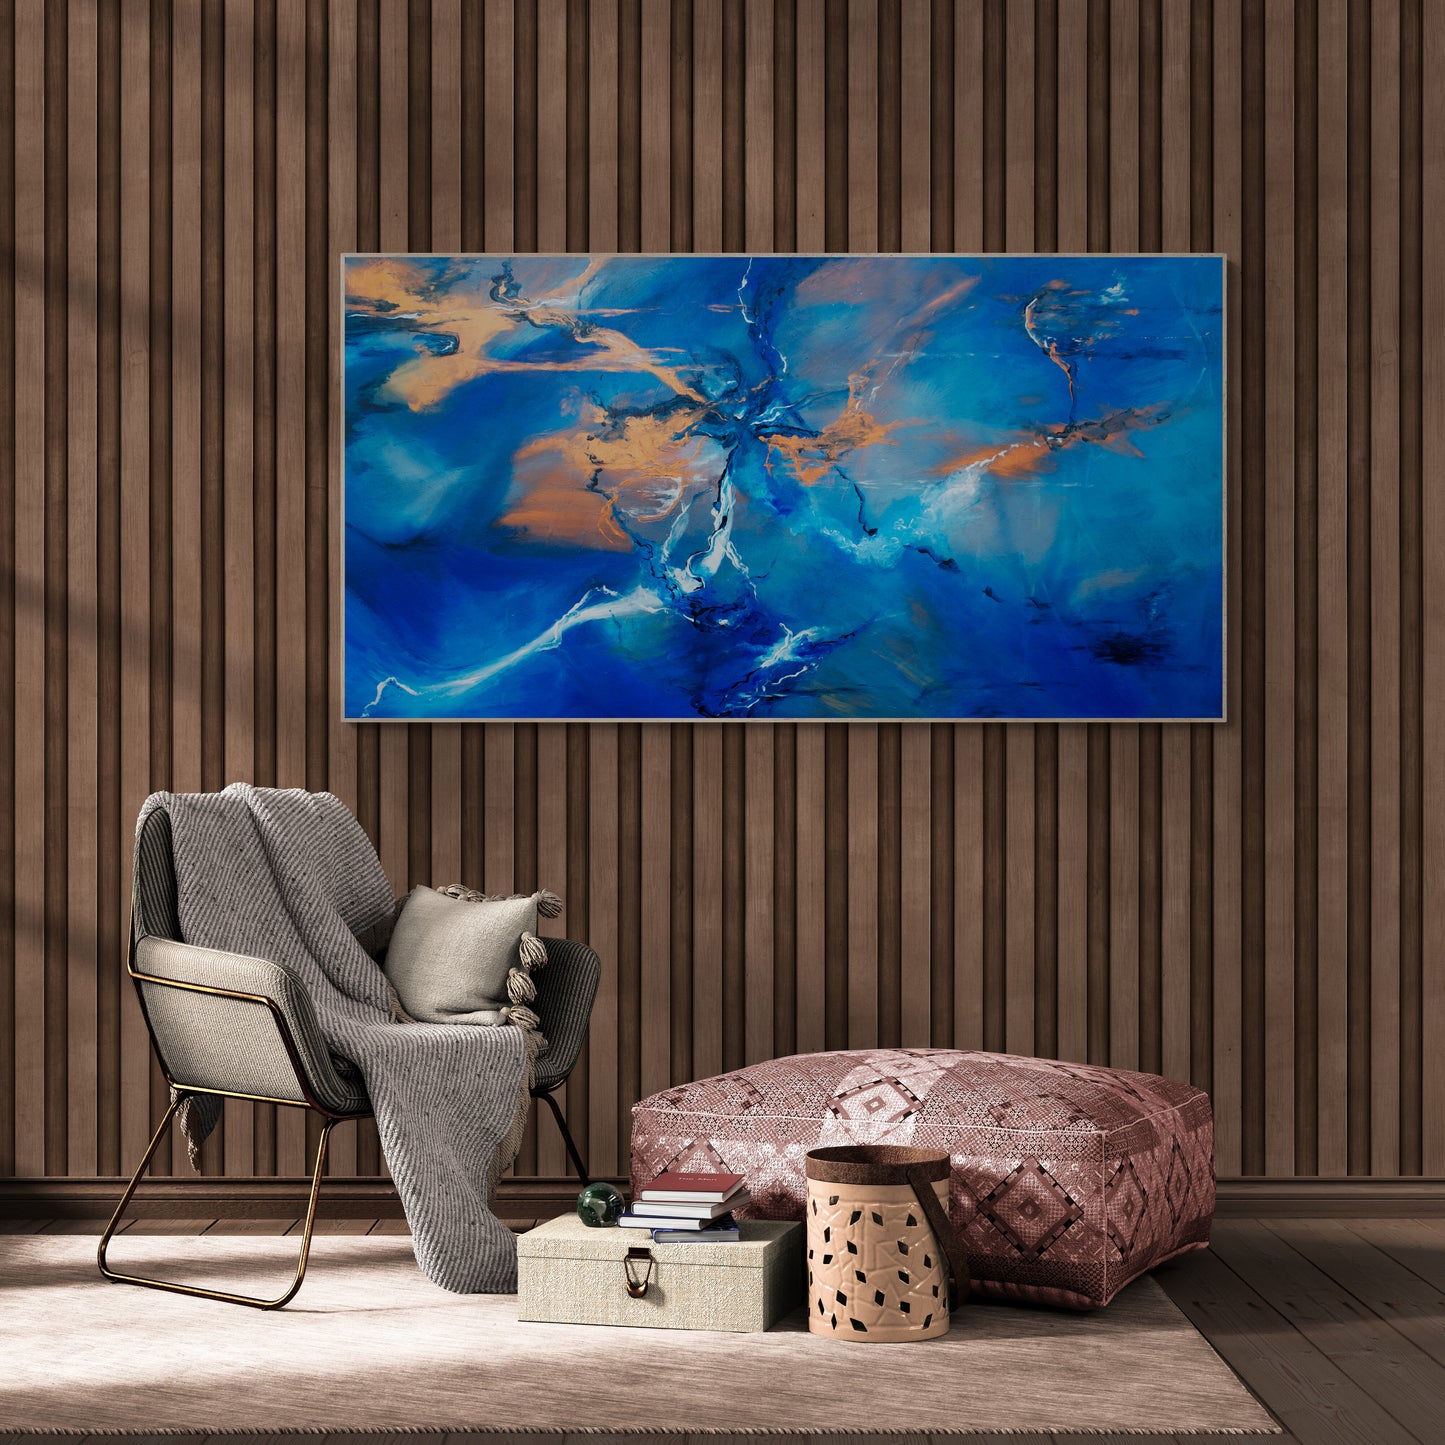 CANVAS PRINT abstract "Blue universe" with artistic finish wall art Scandinavian style